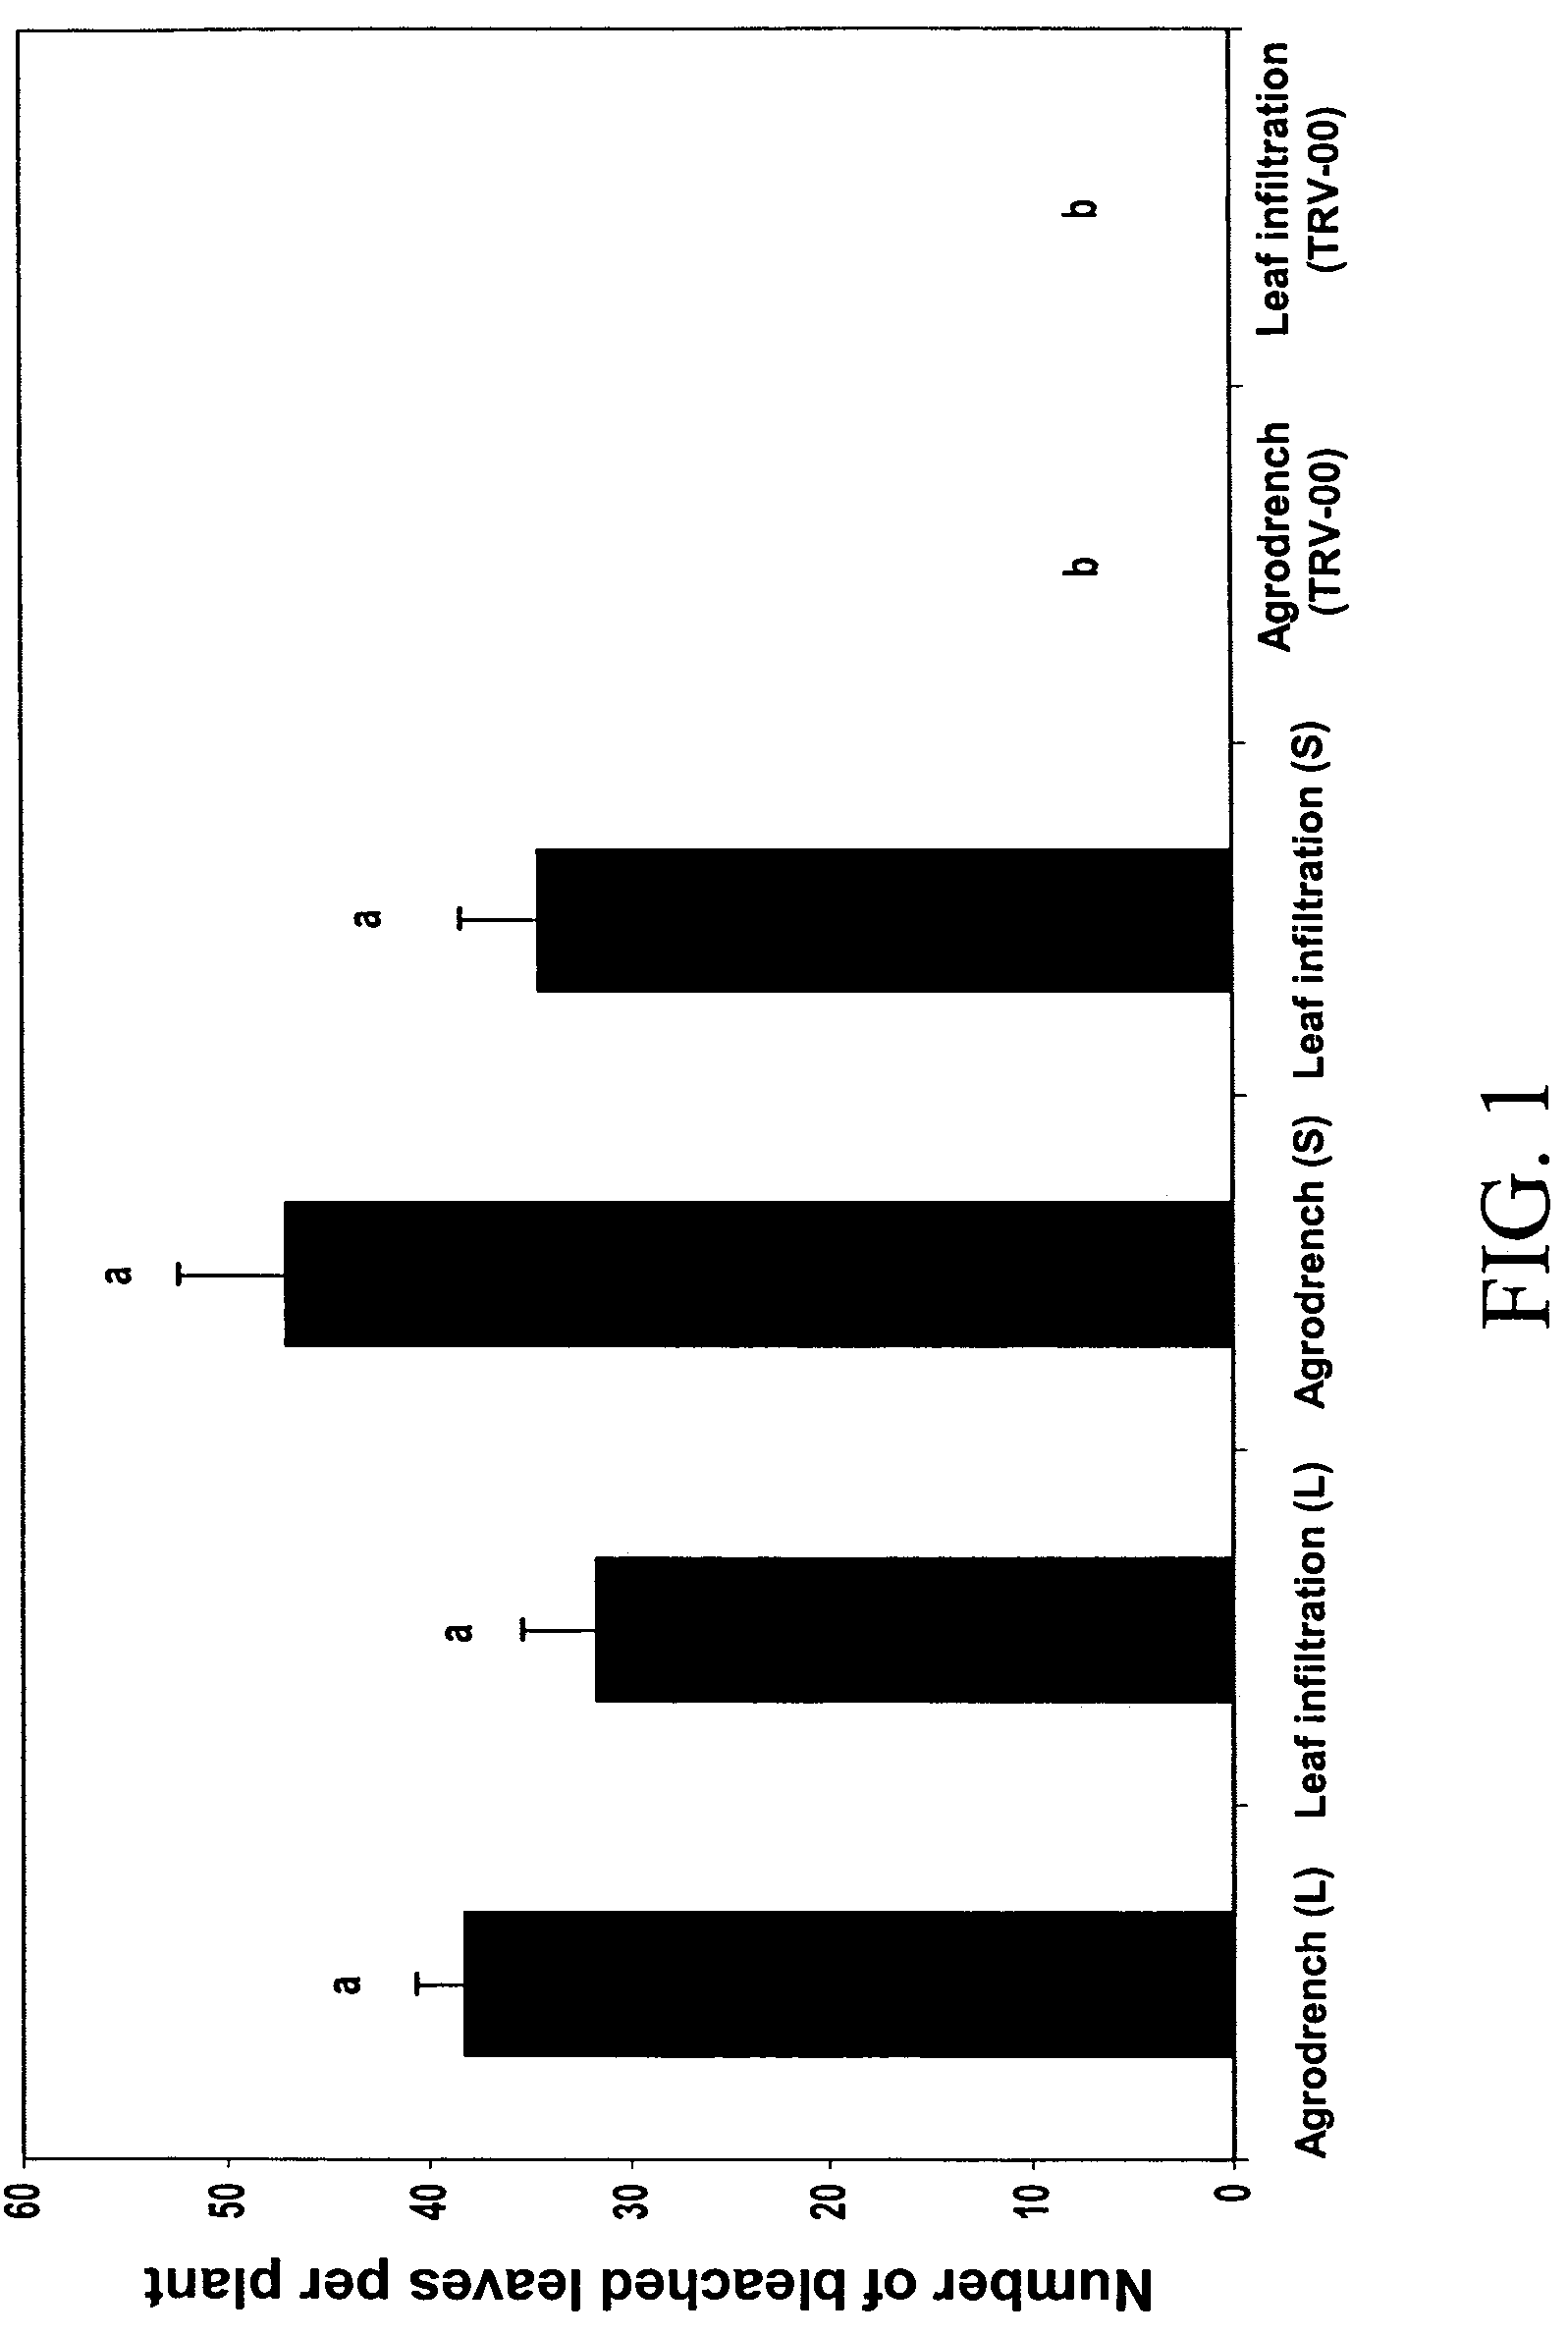 Root agroinoculation method for virus induced gene silencing